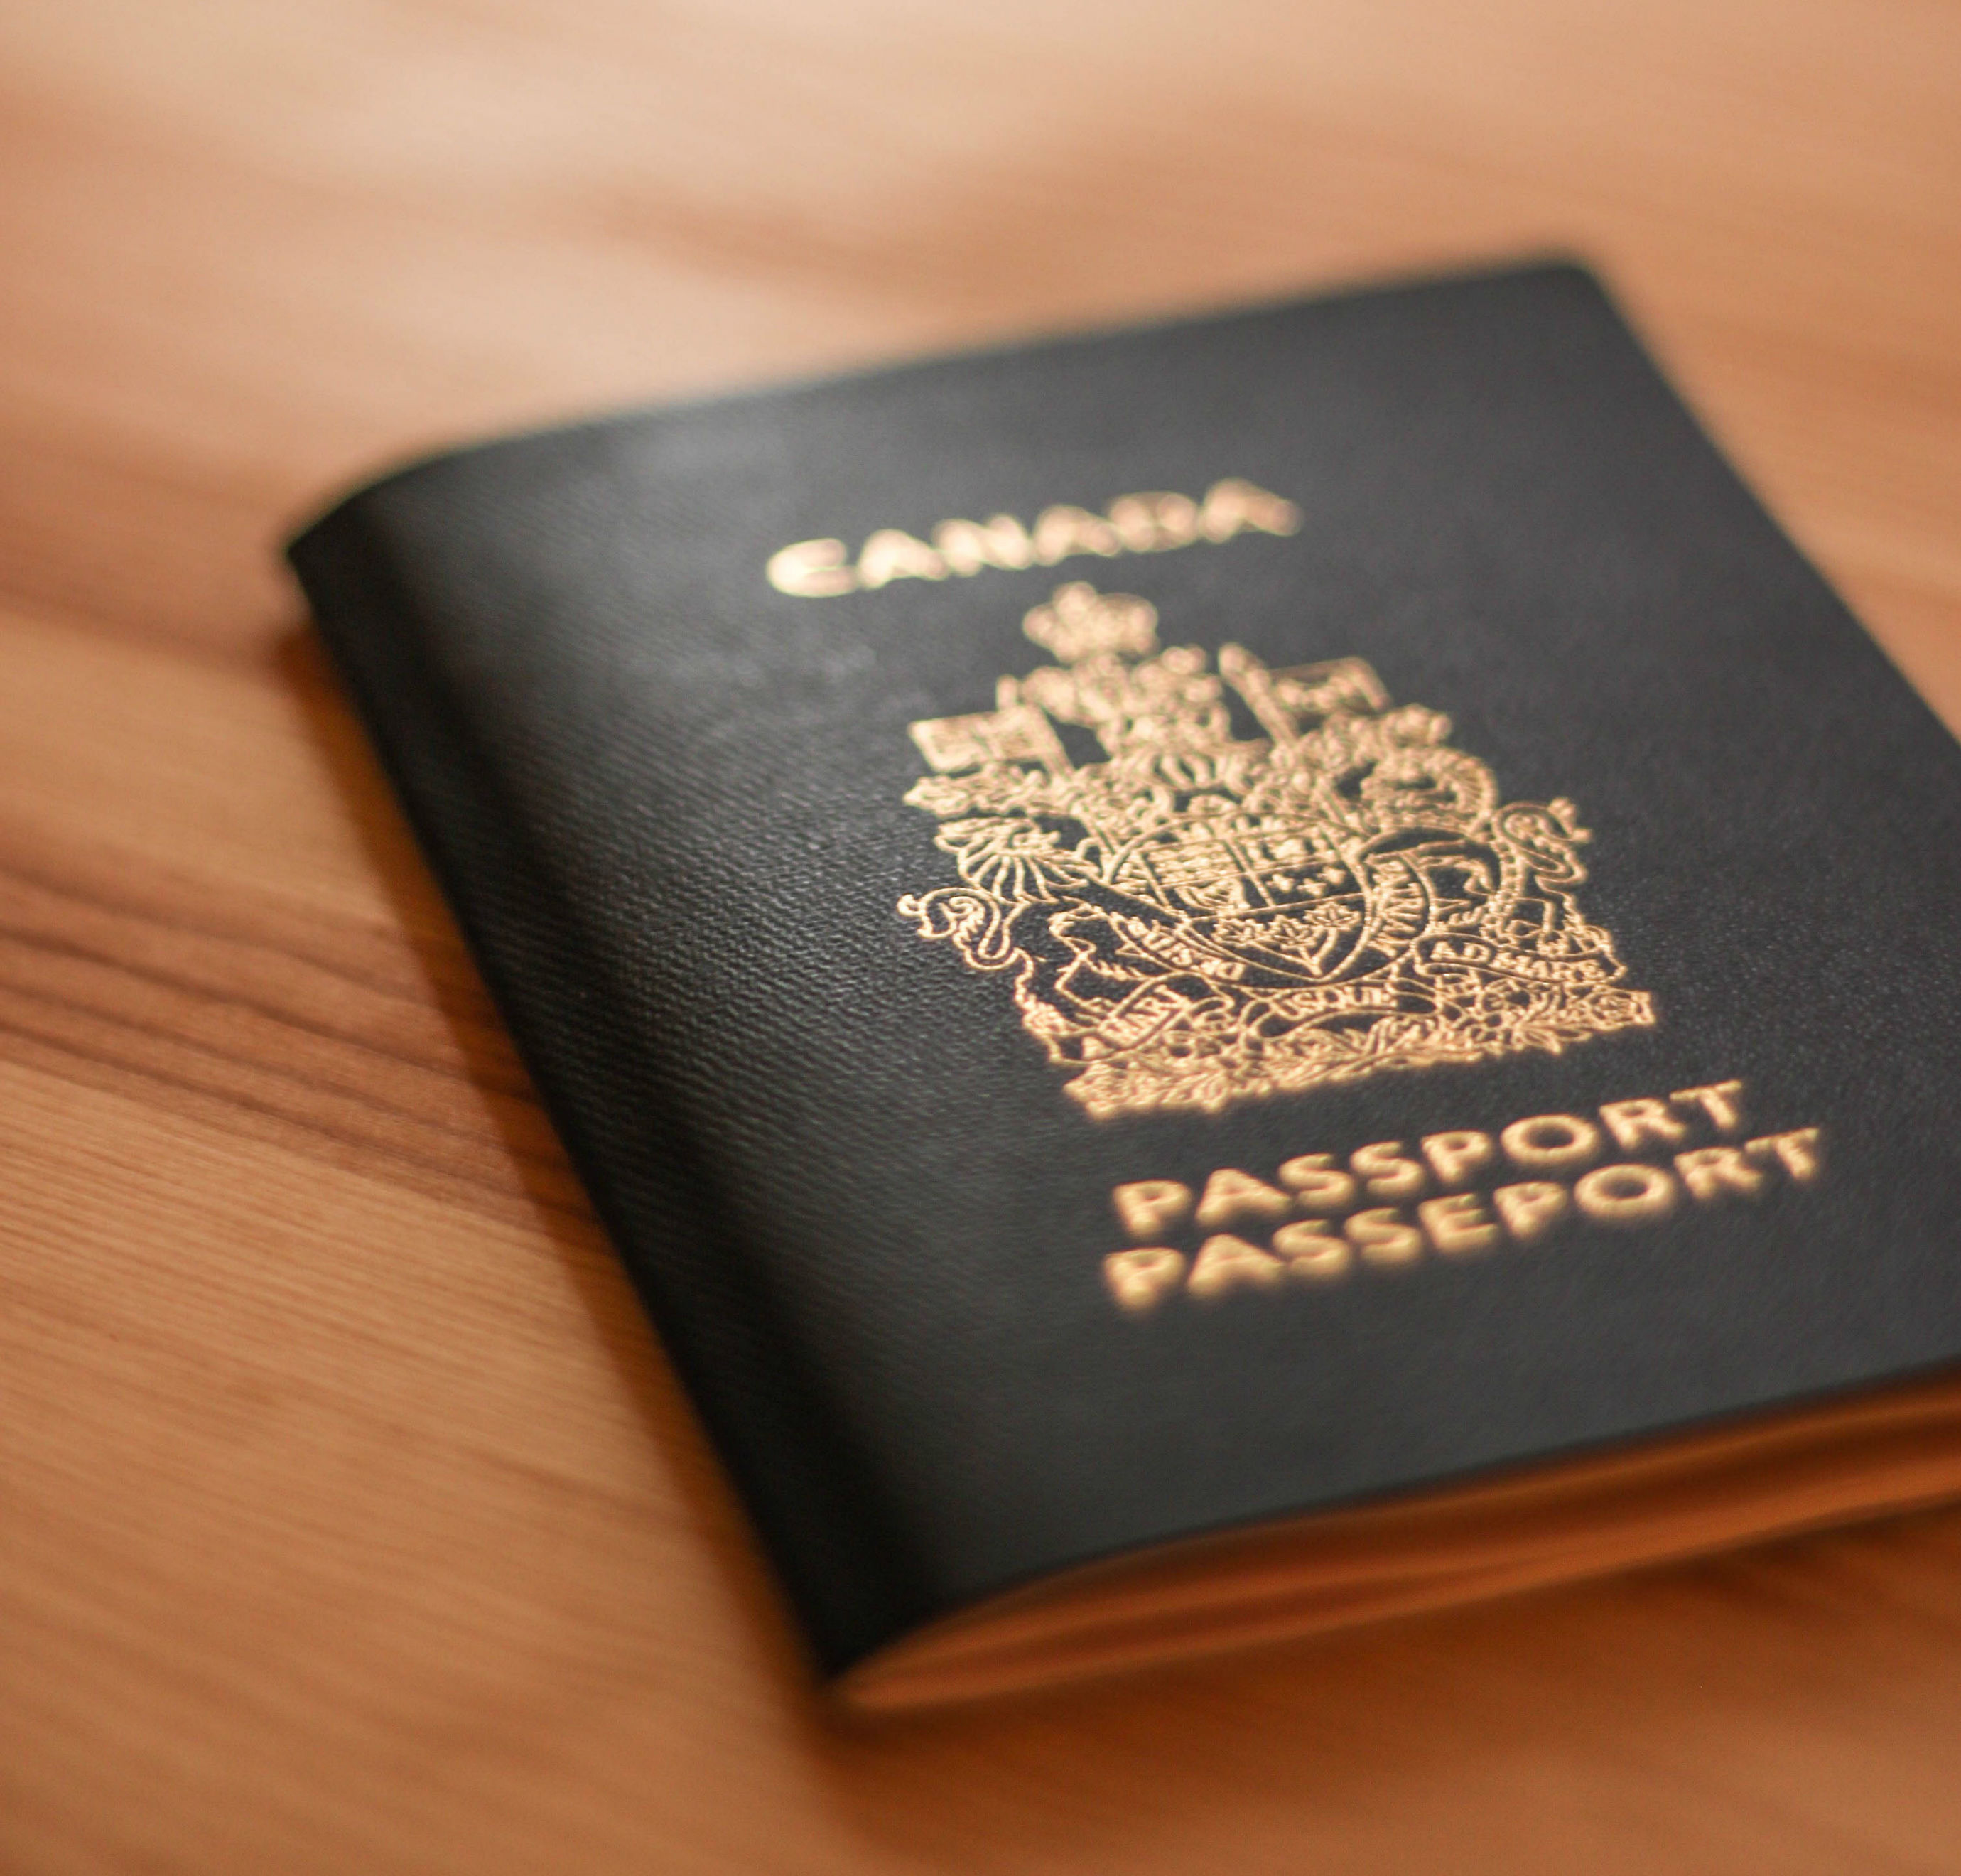 Refused Citizenship Application? Find Out What to Do Next.